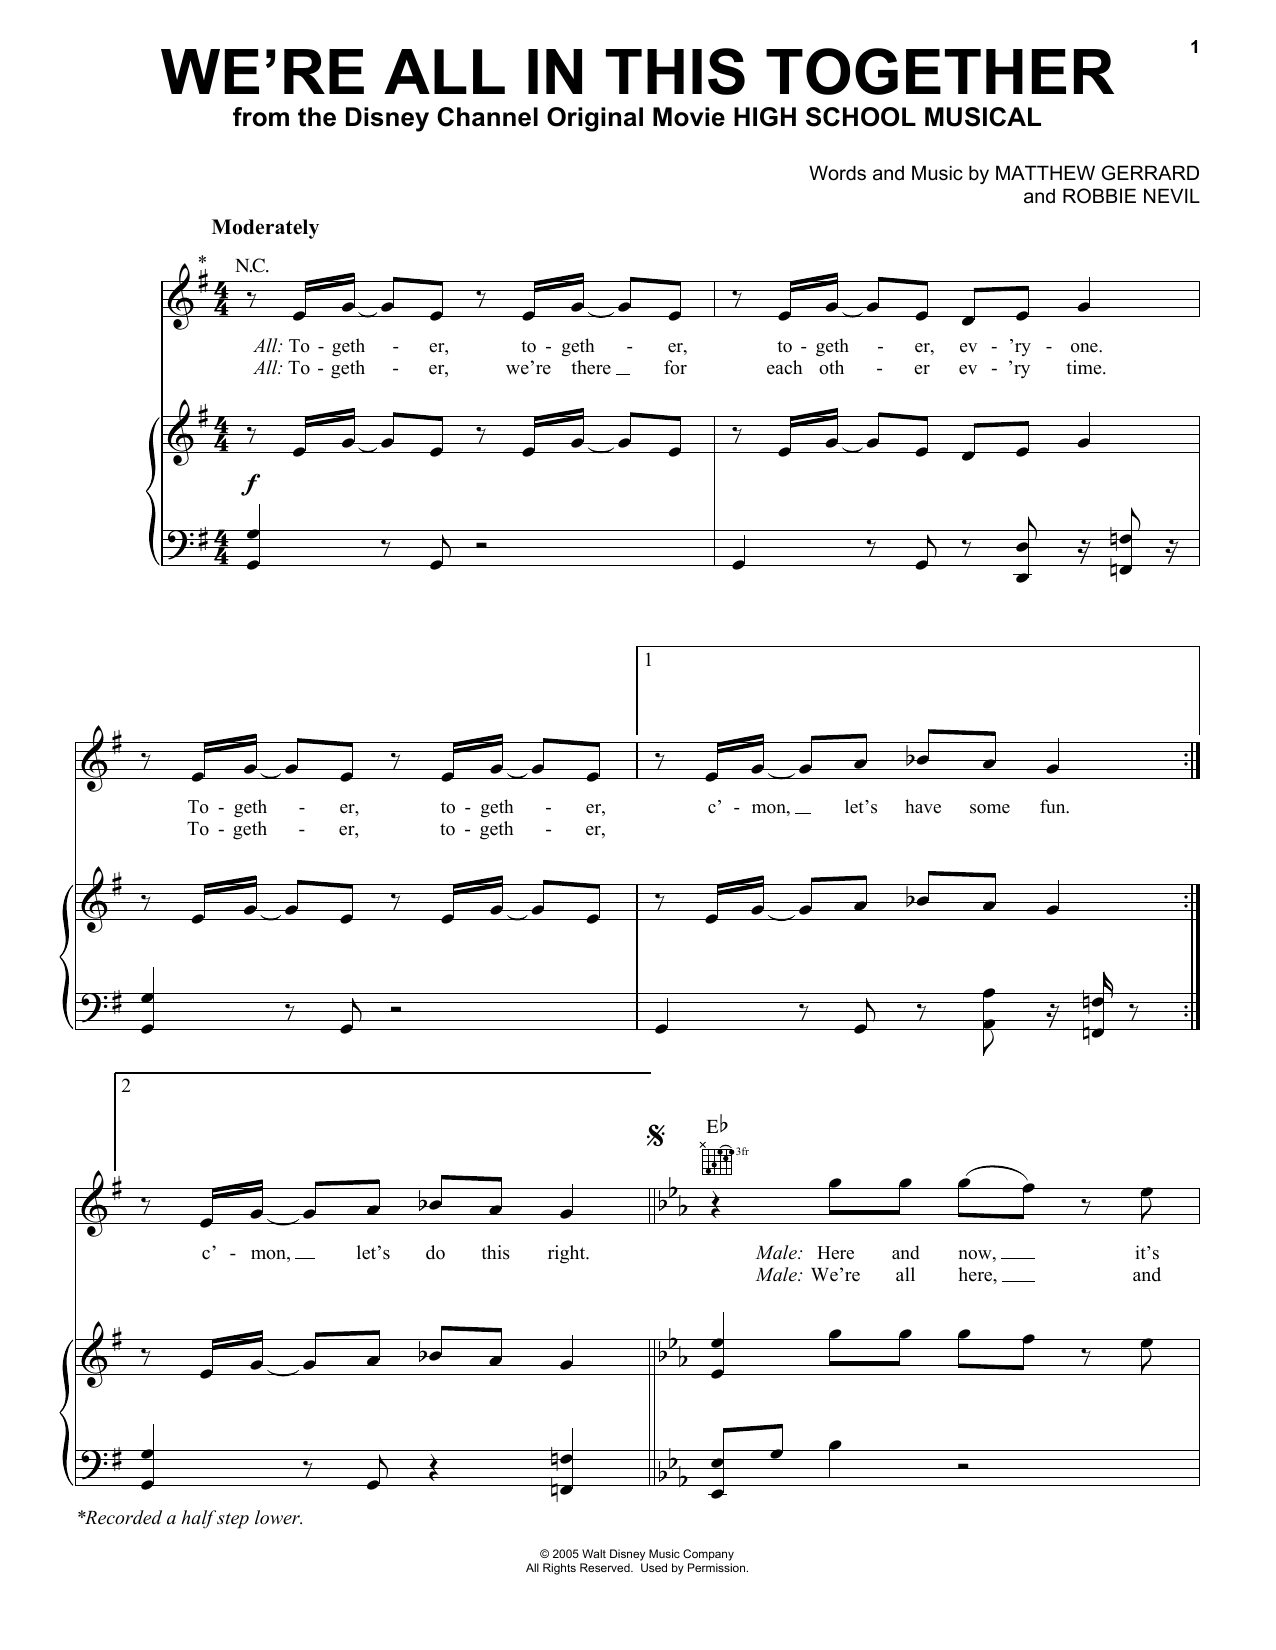 We're All In This Together sheet music